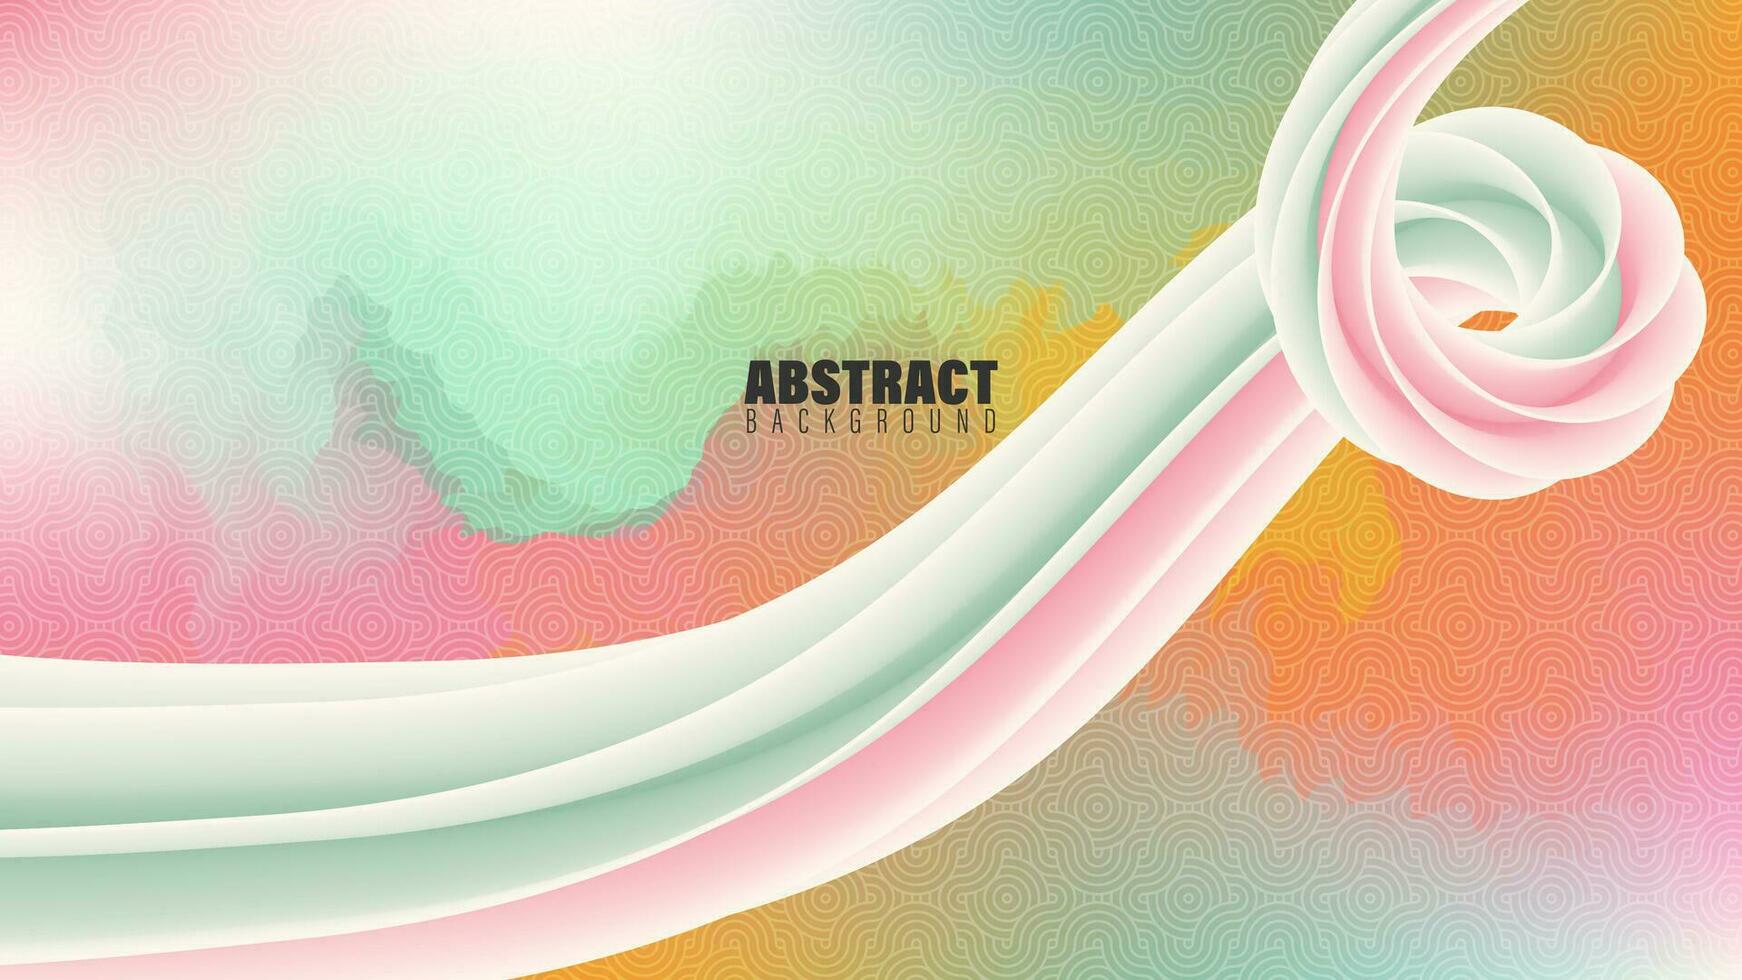 Abstract Background With Colorful Waves and Line vector